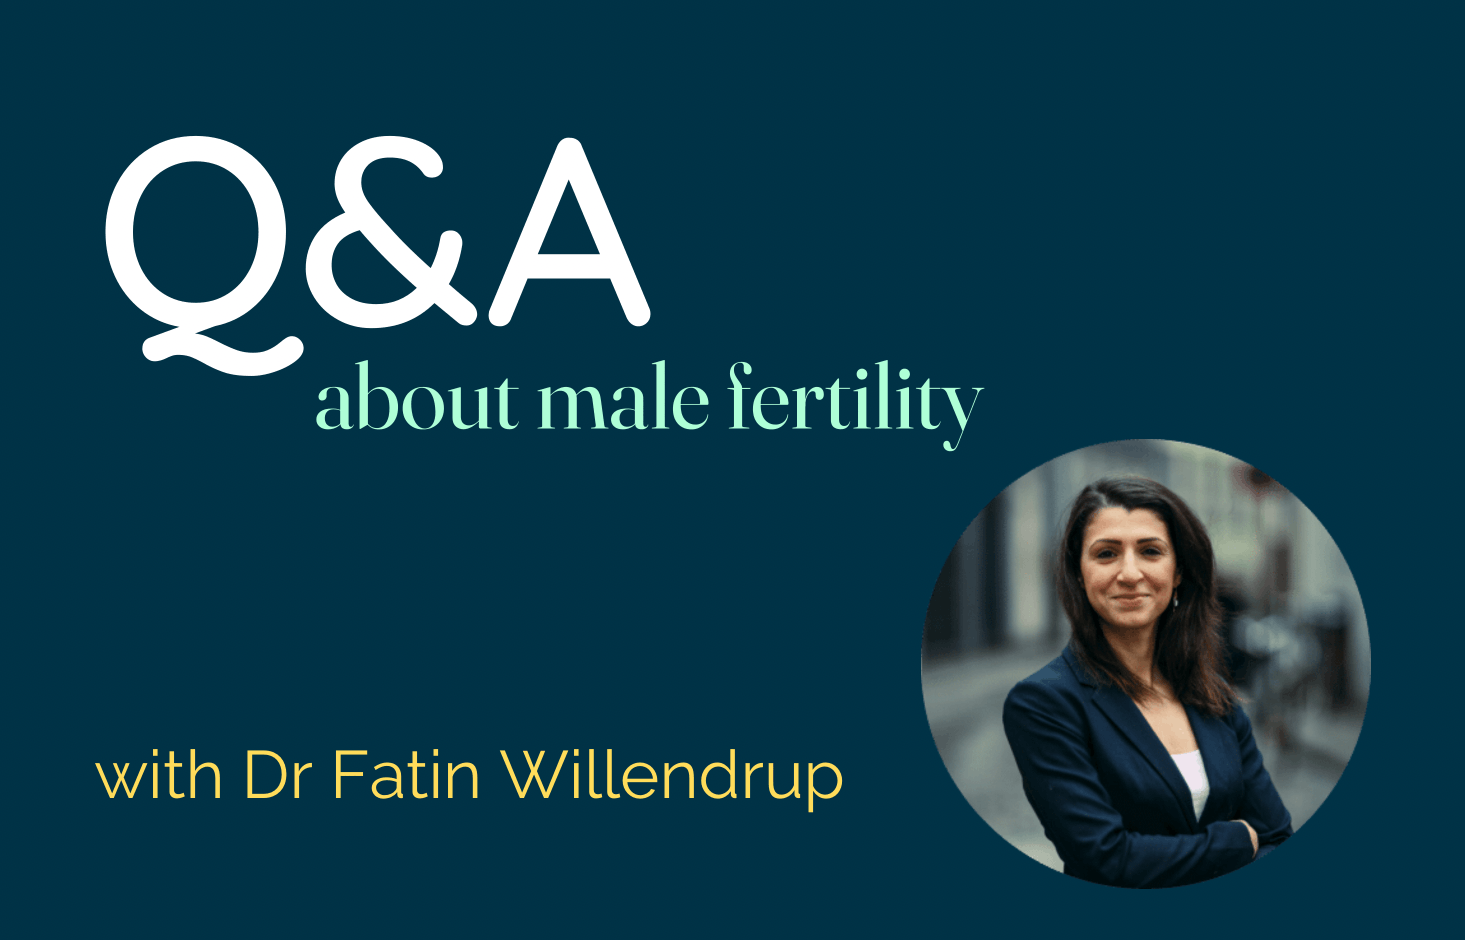 Q&A about male fertility with Dr. Fatin